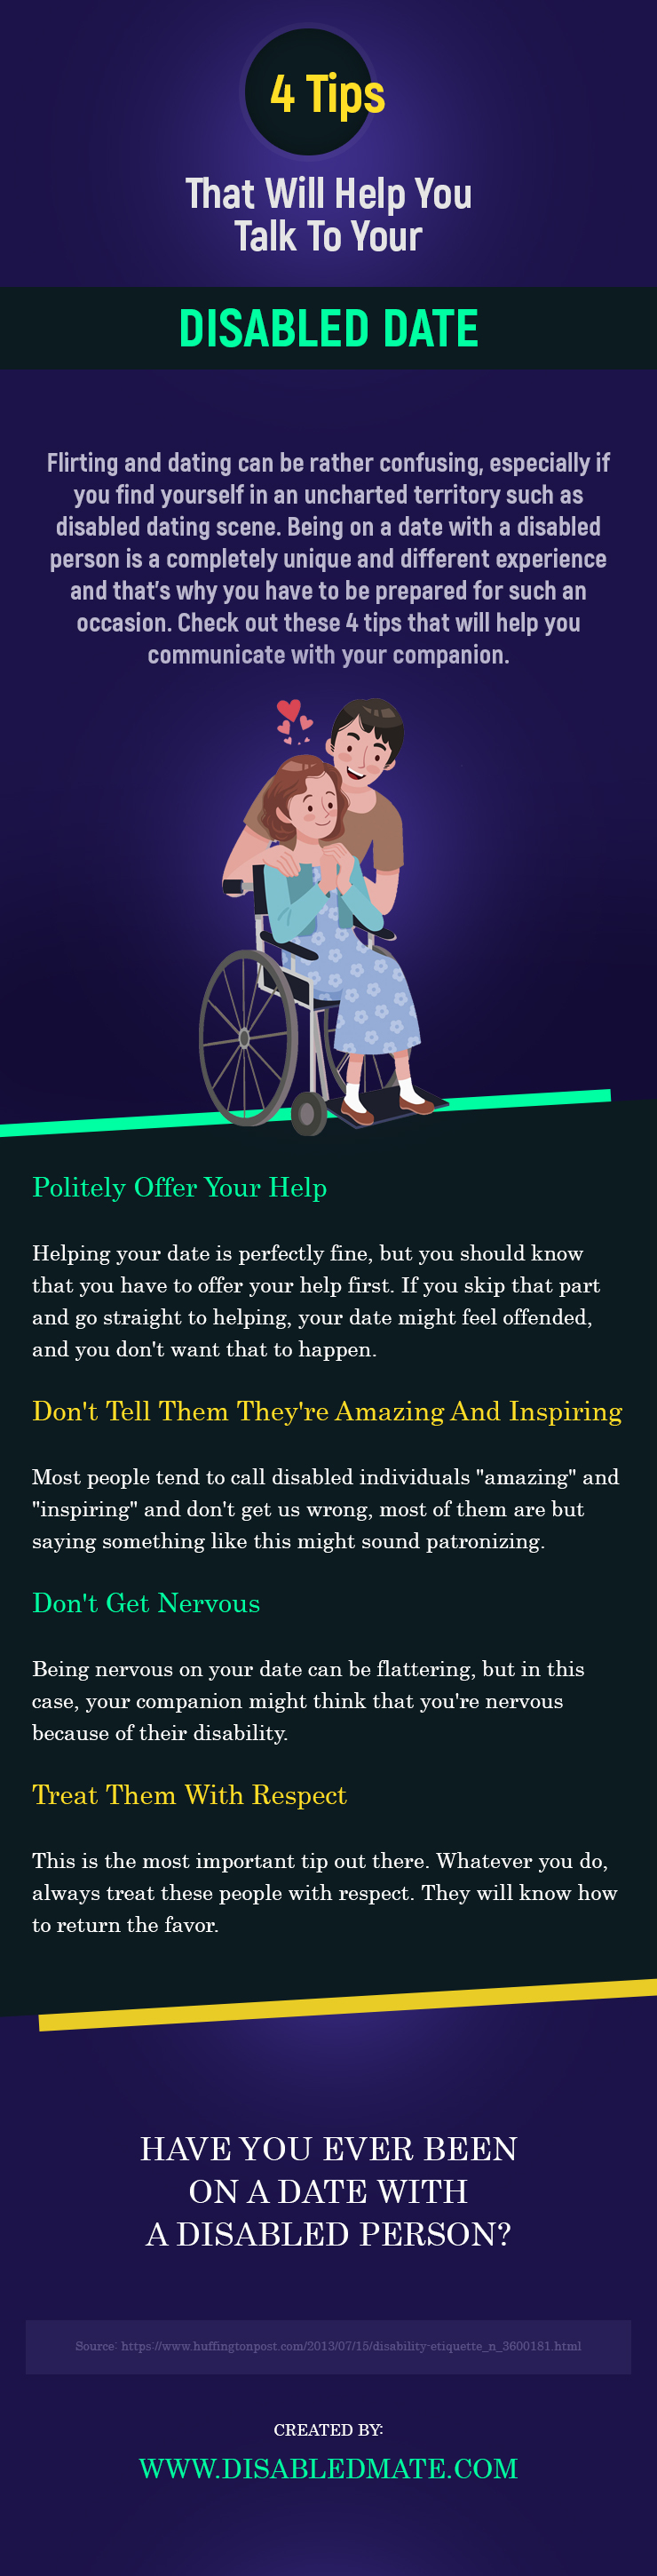 4 Tips That Will Help You Talk To Your Disabled Date